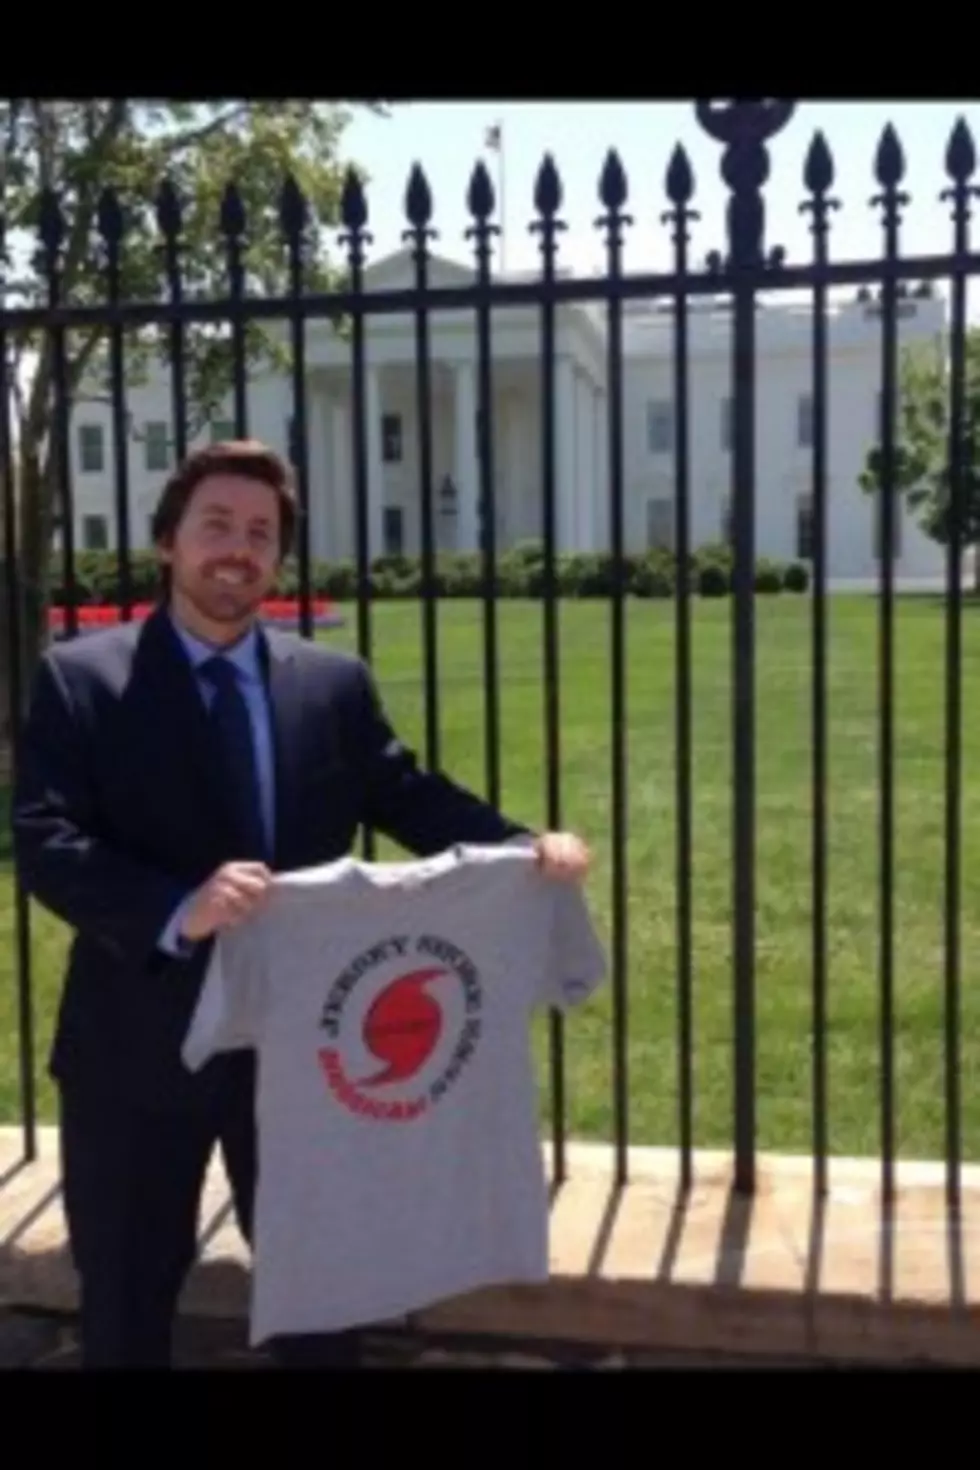 South Seaside Park Man Honored at the White House